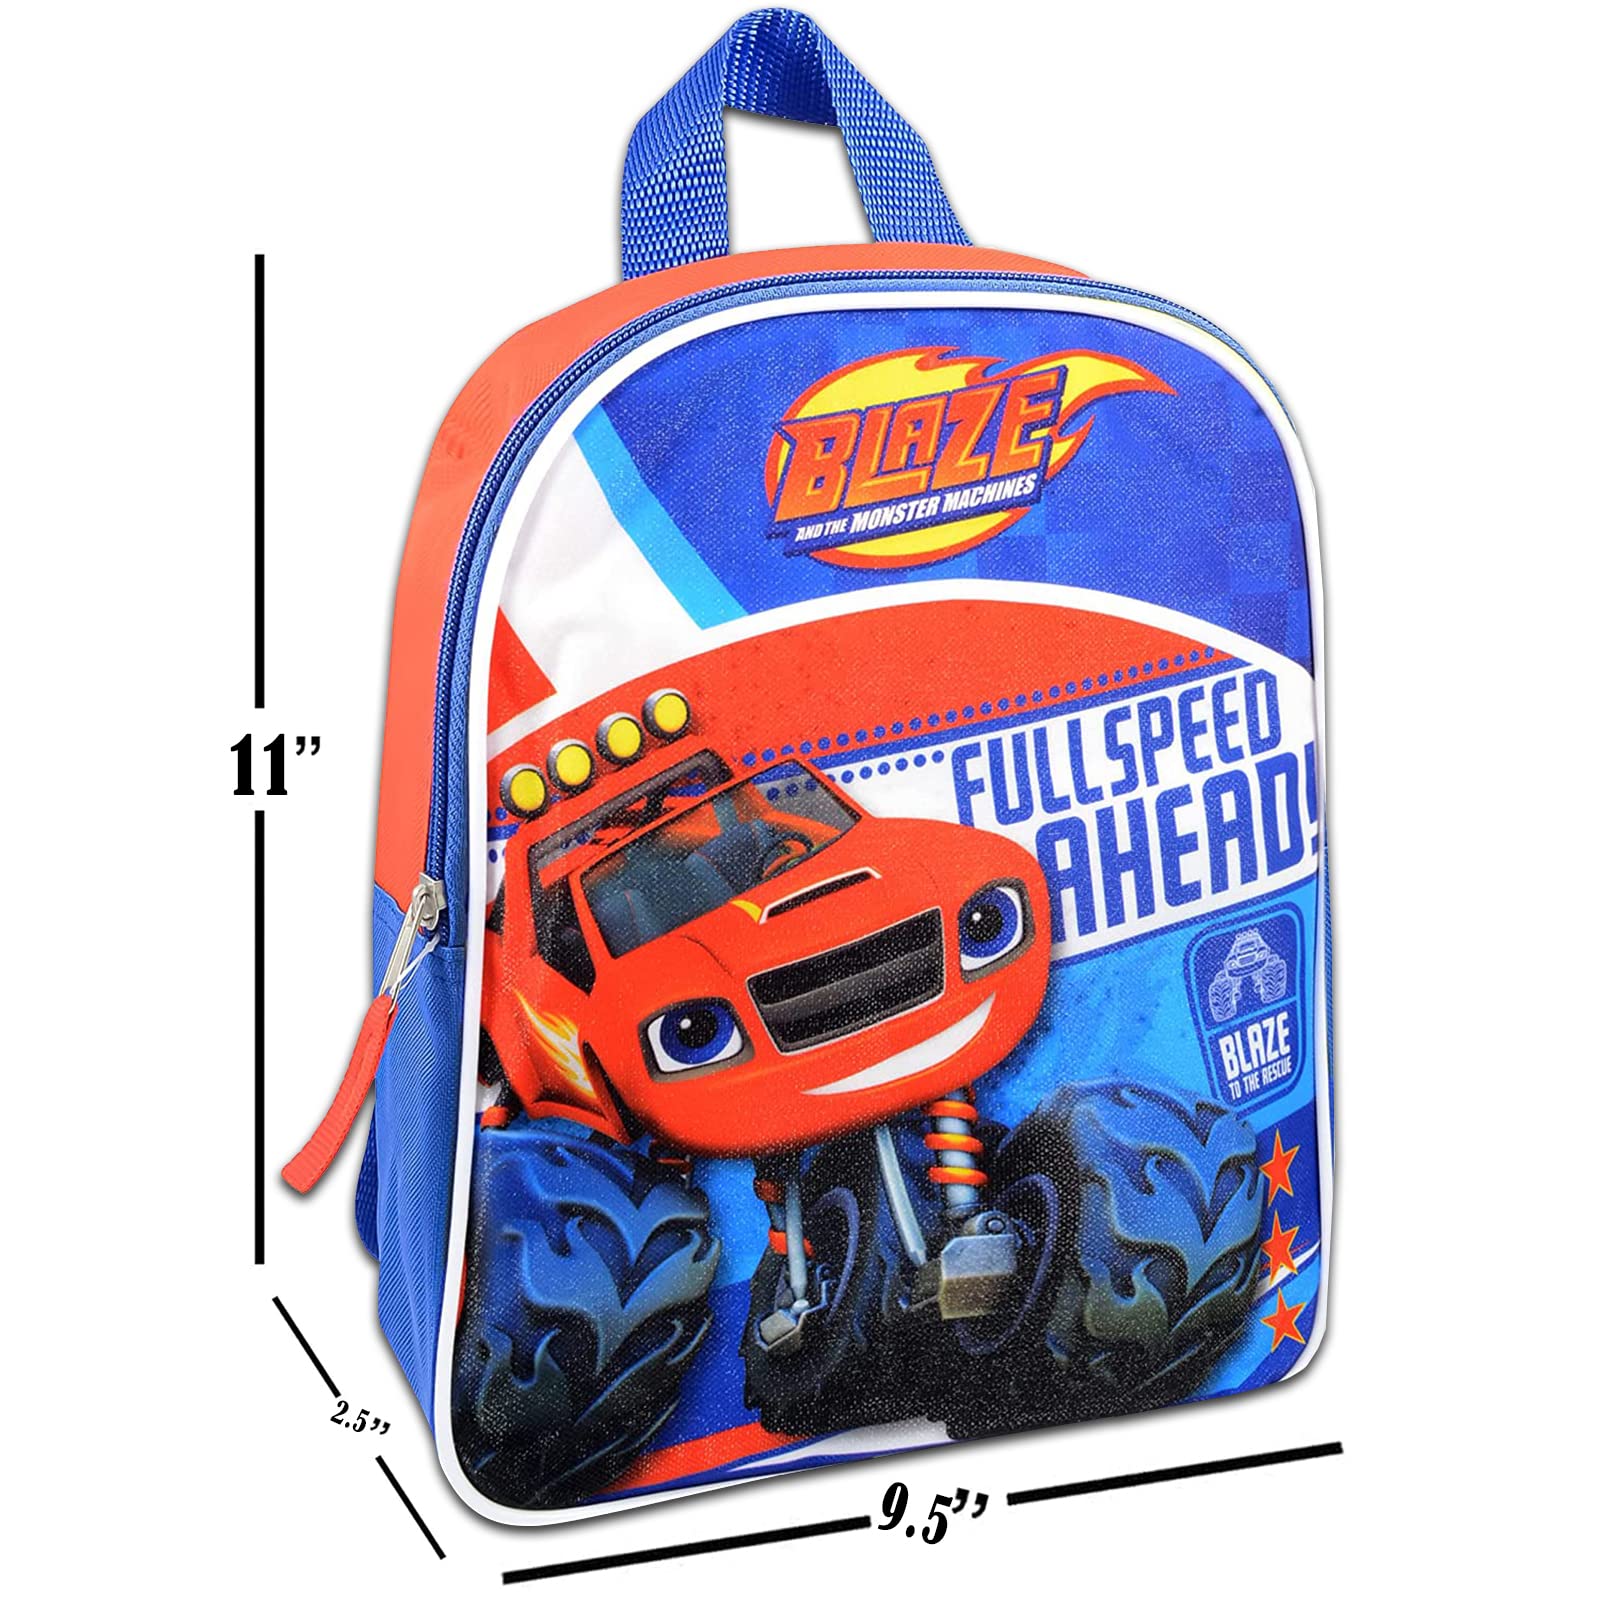 Nick Shop Blaze And The Monster Machines Mini Backpack ~ 3 Pc Bundle With 11 Blaze School Bag Preschool monster truck mini backpack monster truck backpack toddler boys